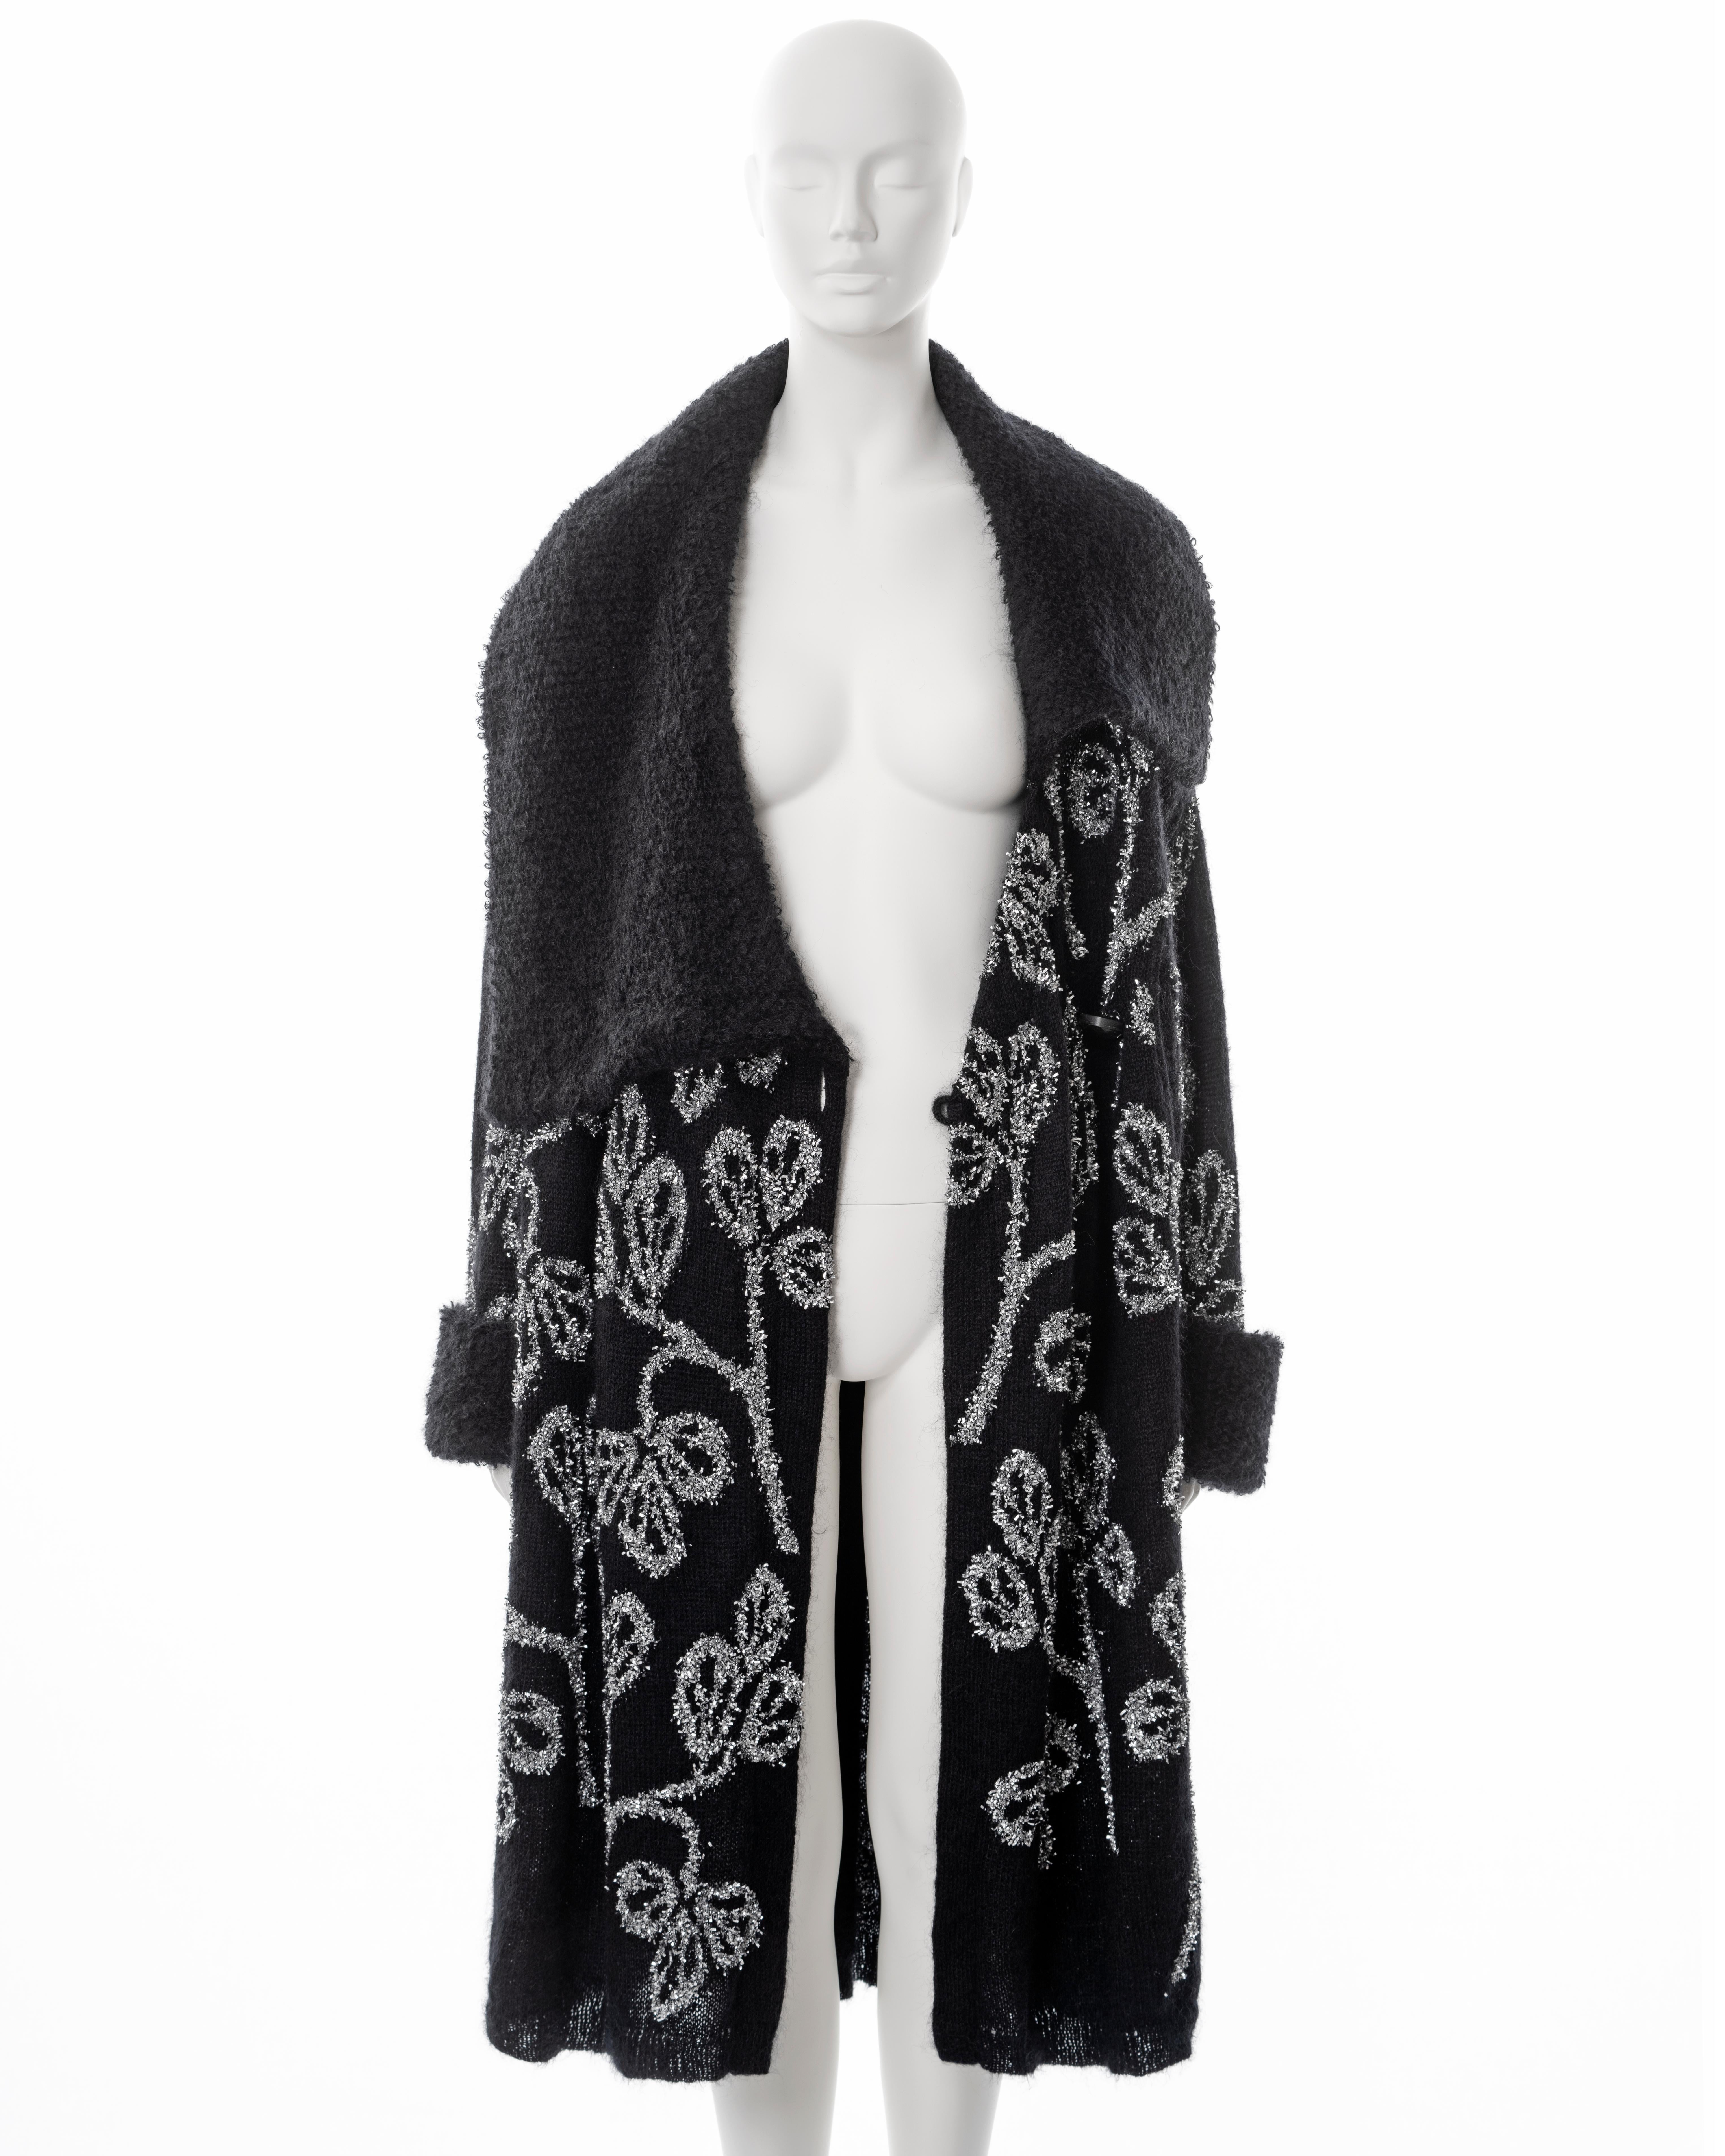 John Galliano black knitted wool cardigan with silver tinsel embroidery, ss 2003 6